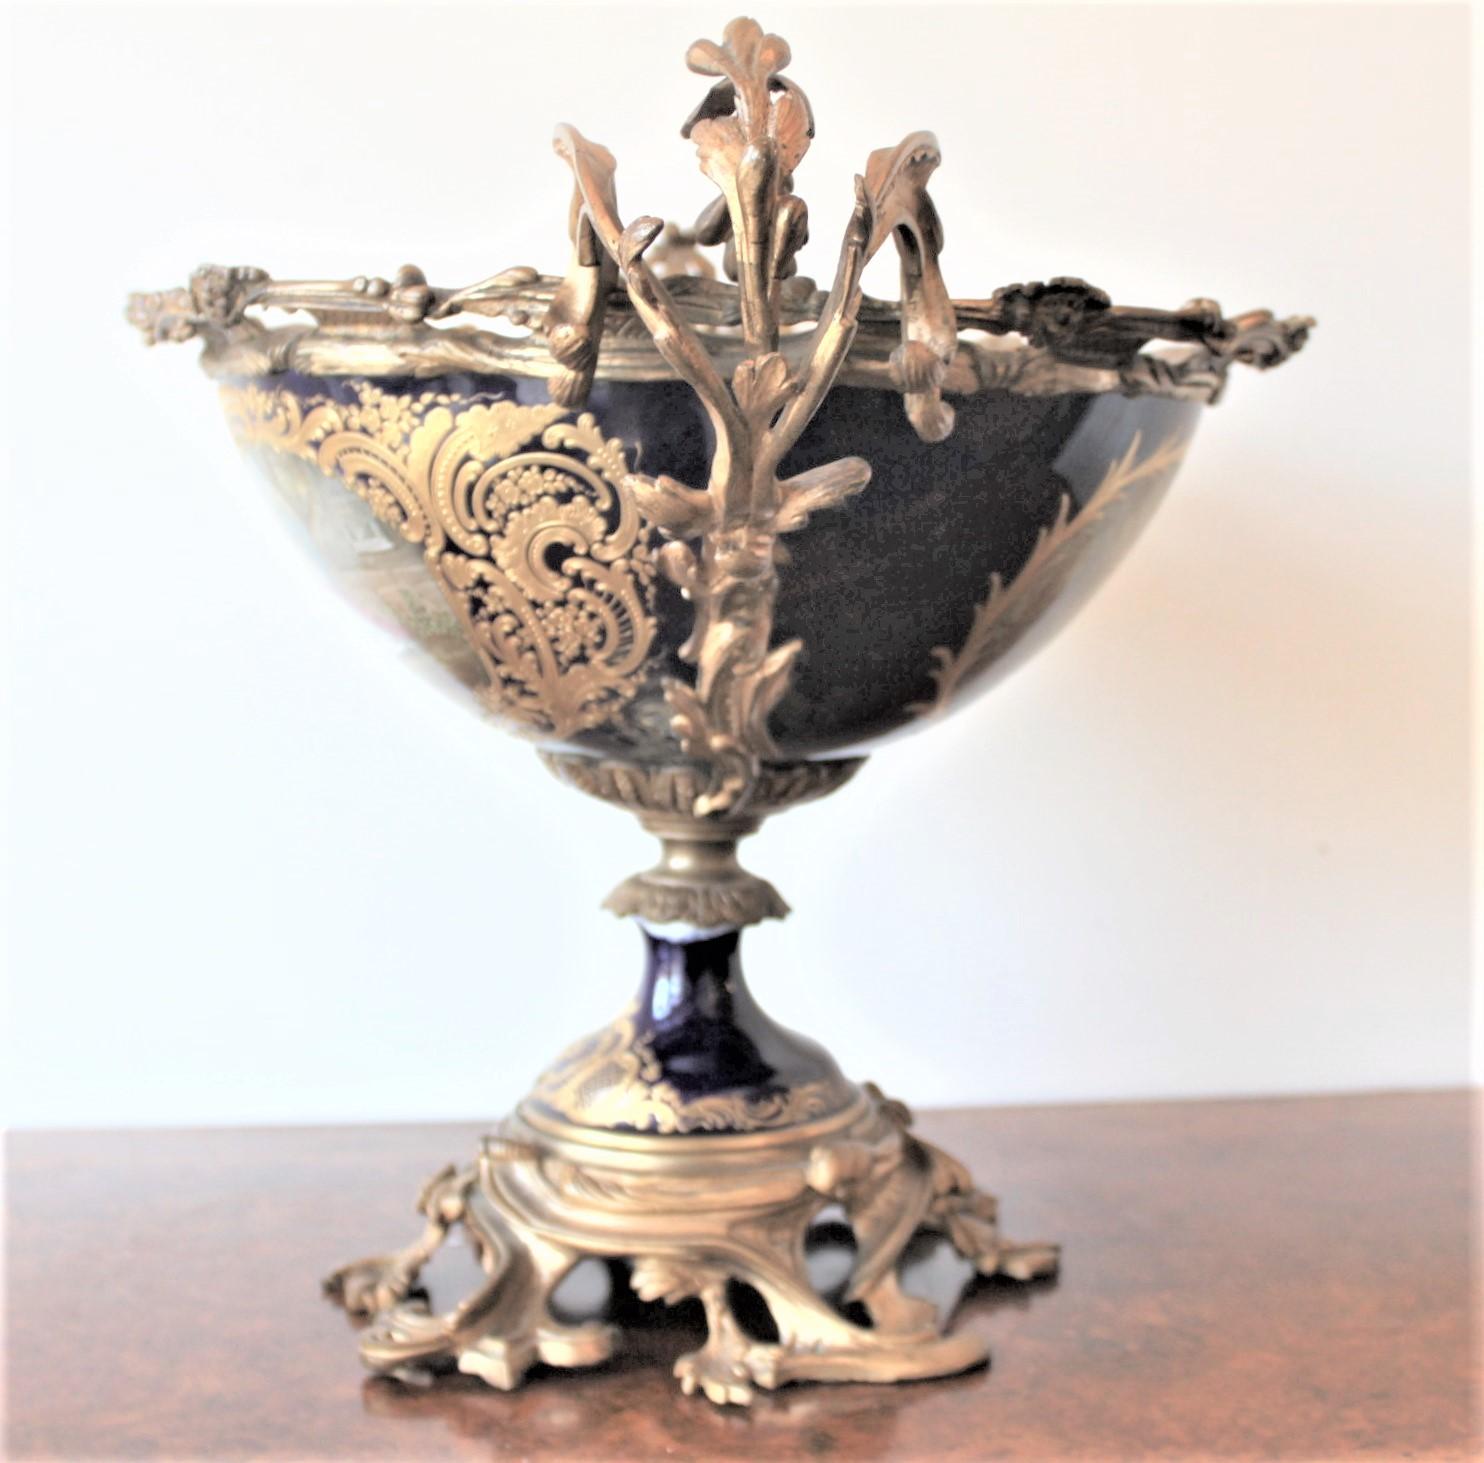 French Antique Sevres Ormolu-Mounted and Hand Painted Porcelain Centerpiece or Compote